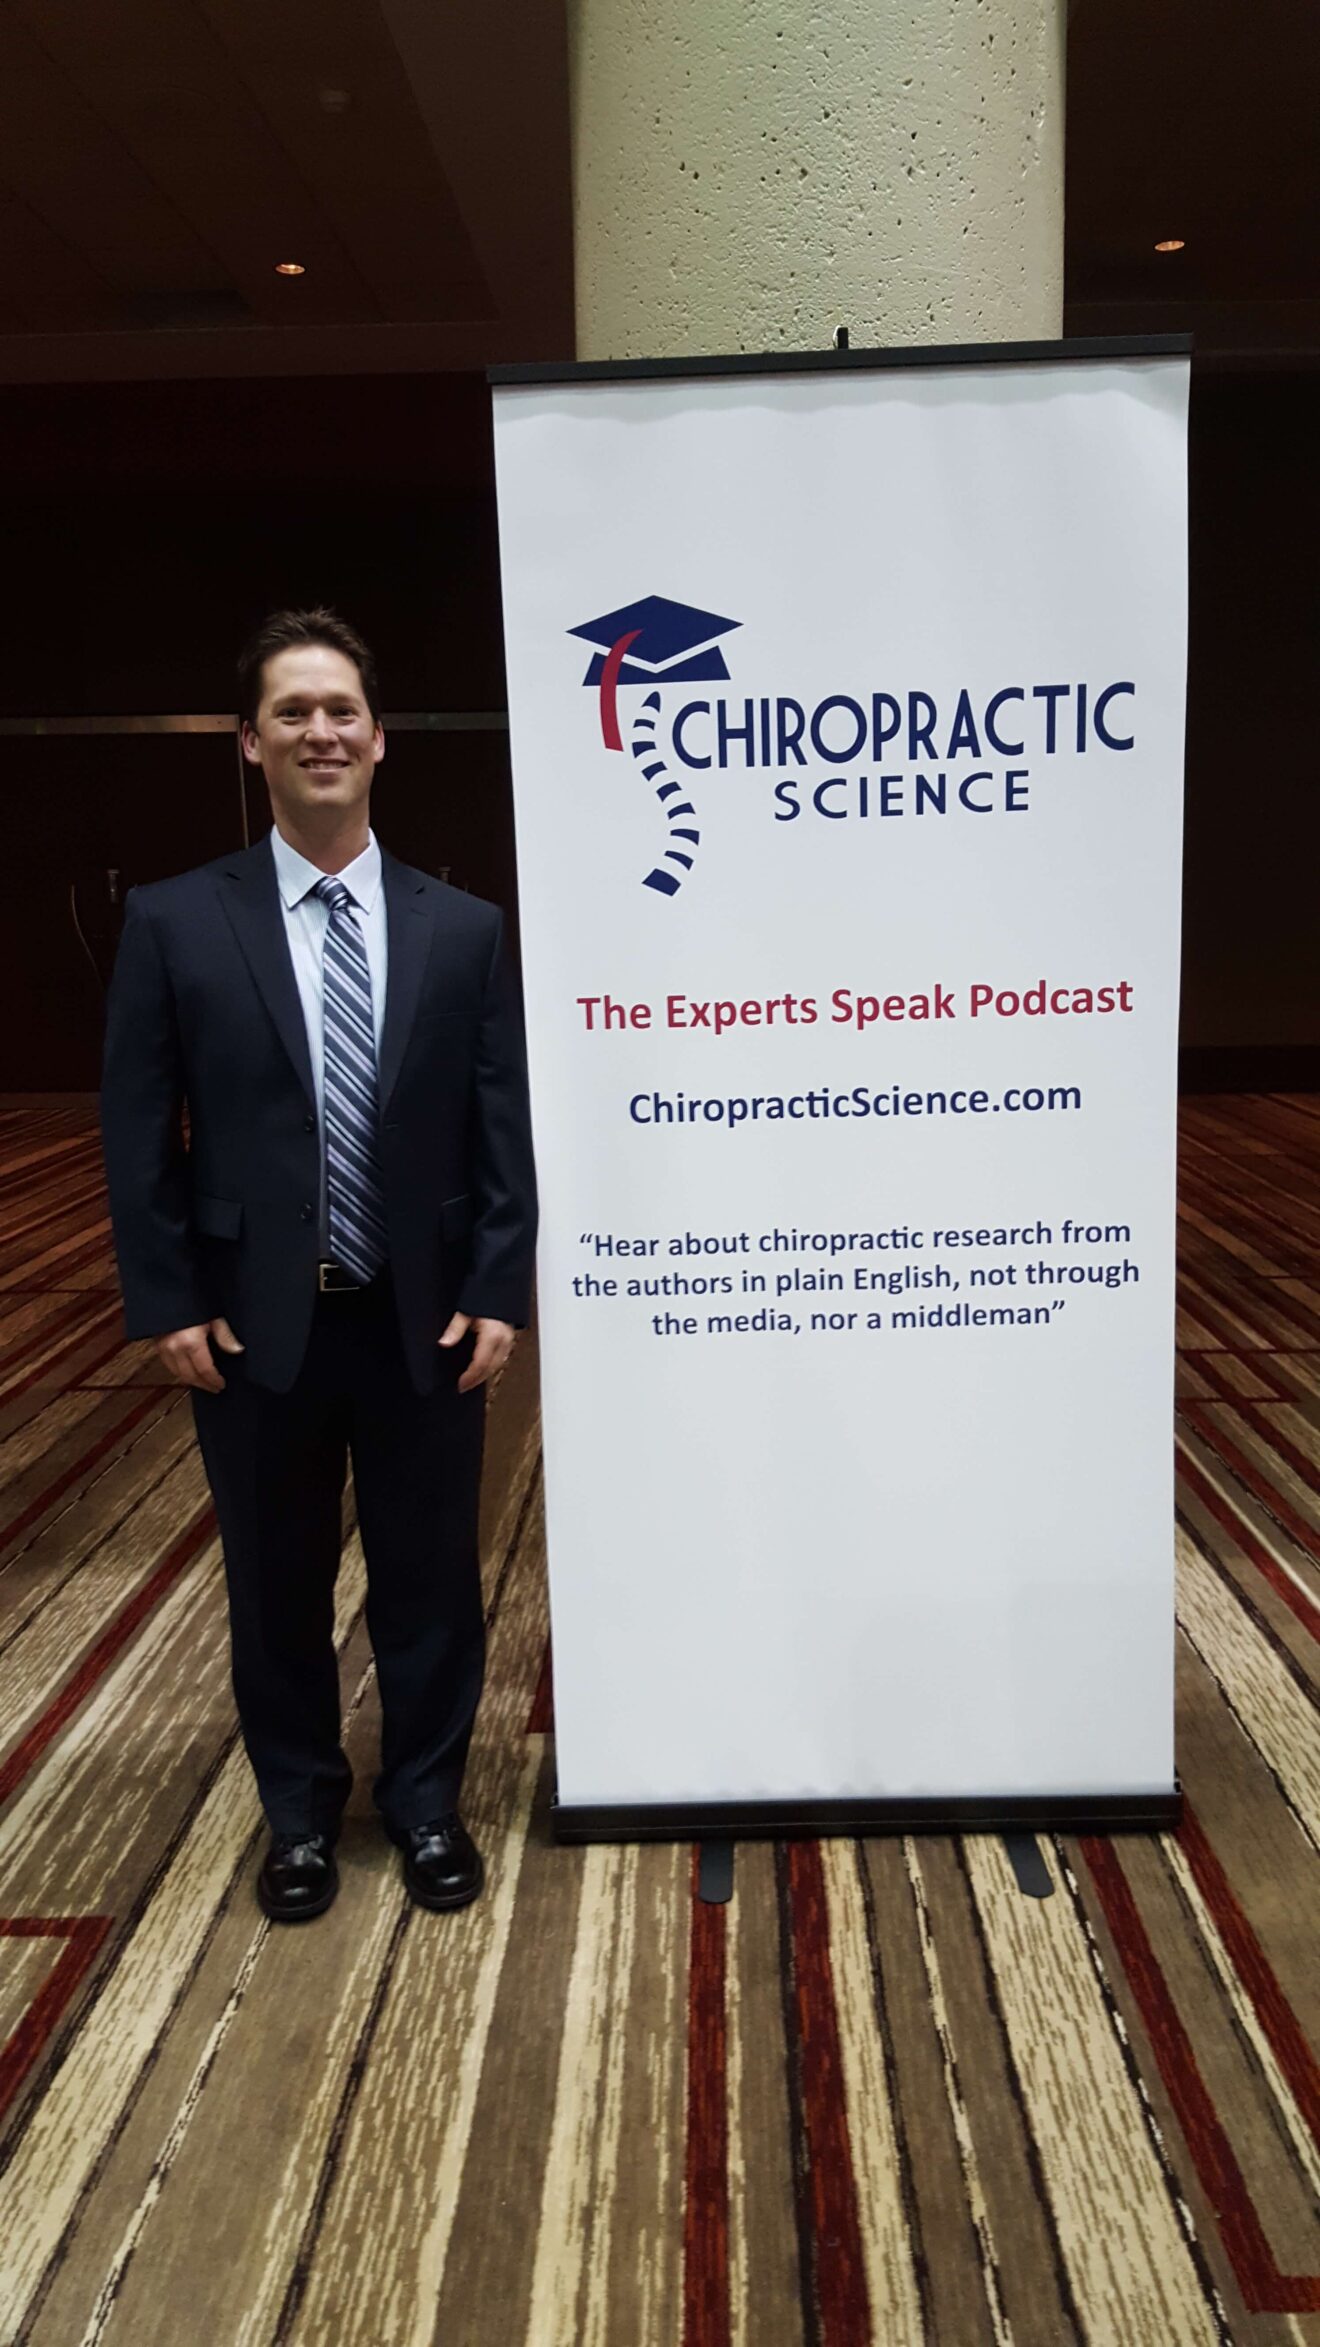 Dean Chiropractic Science podcast